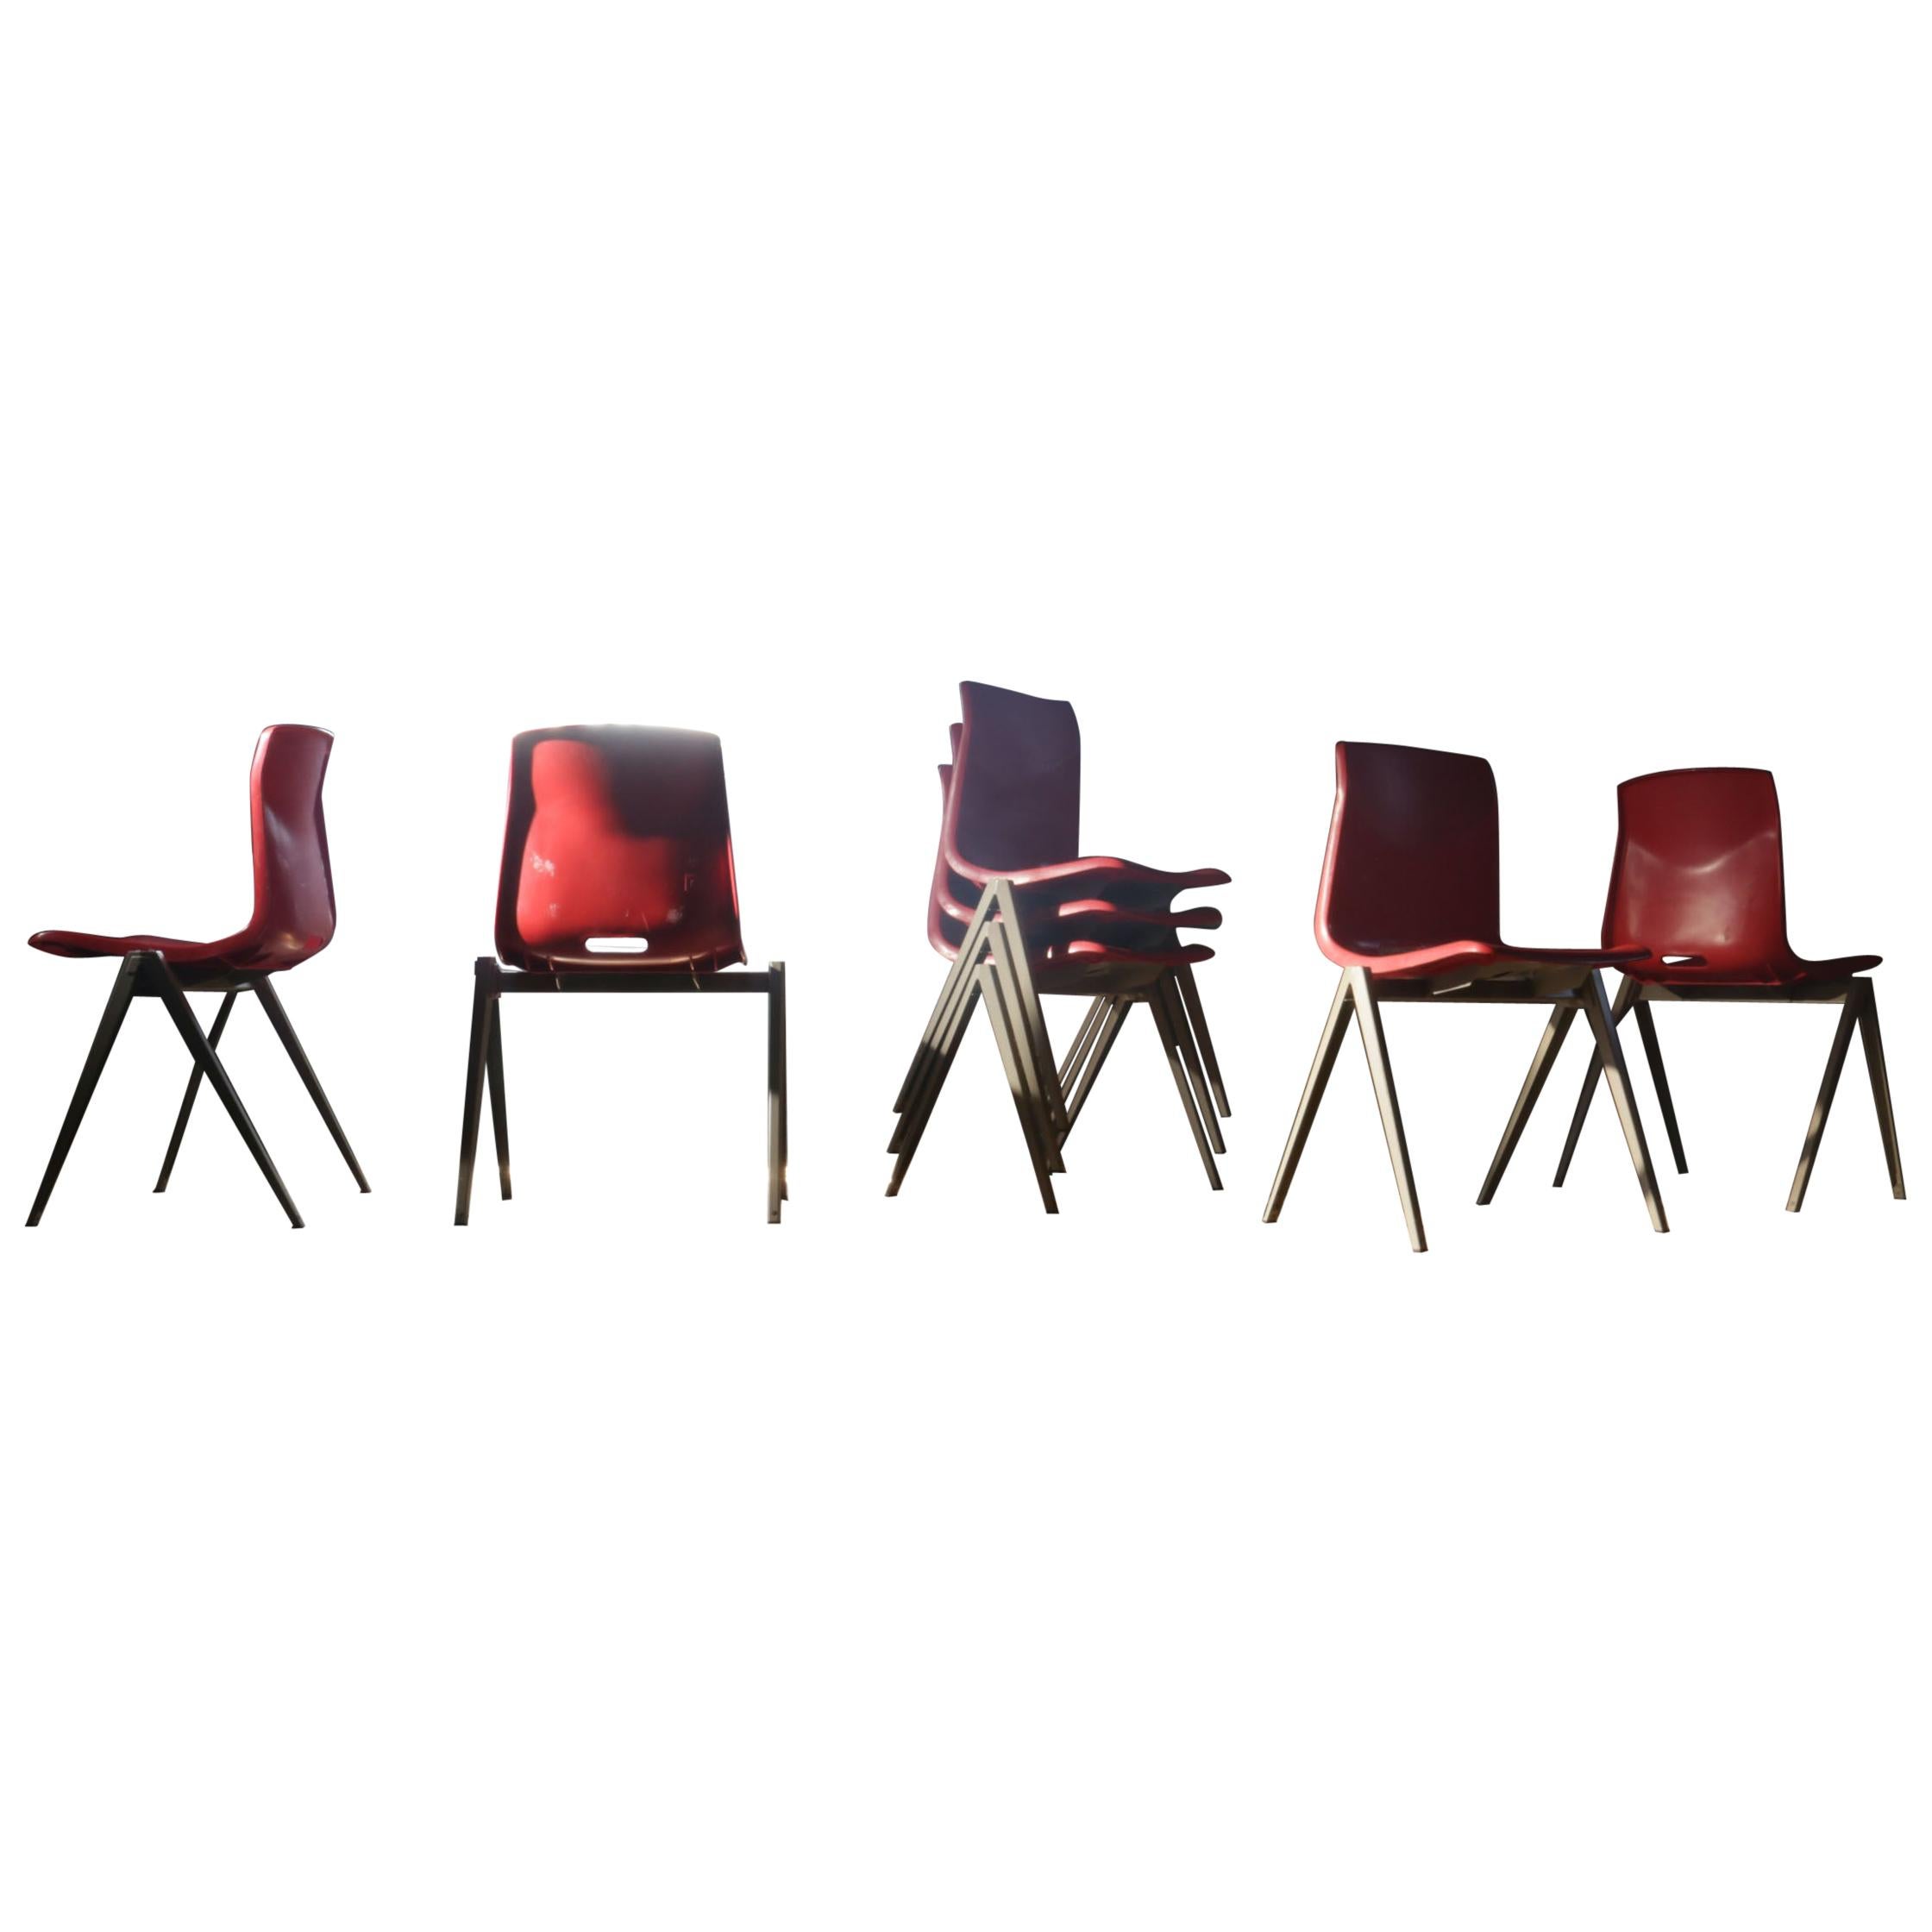 Industrial Piramid Stacking, School Chairs Galvanitas S22 Prouve Style